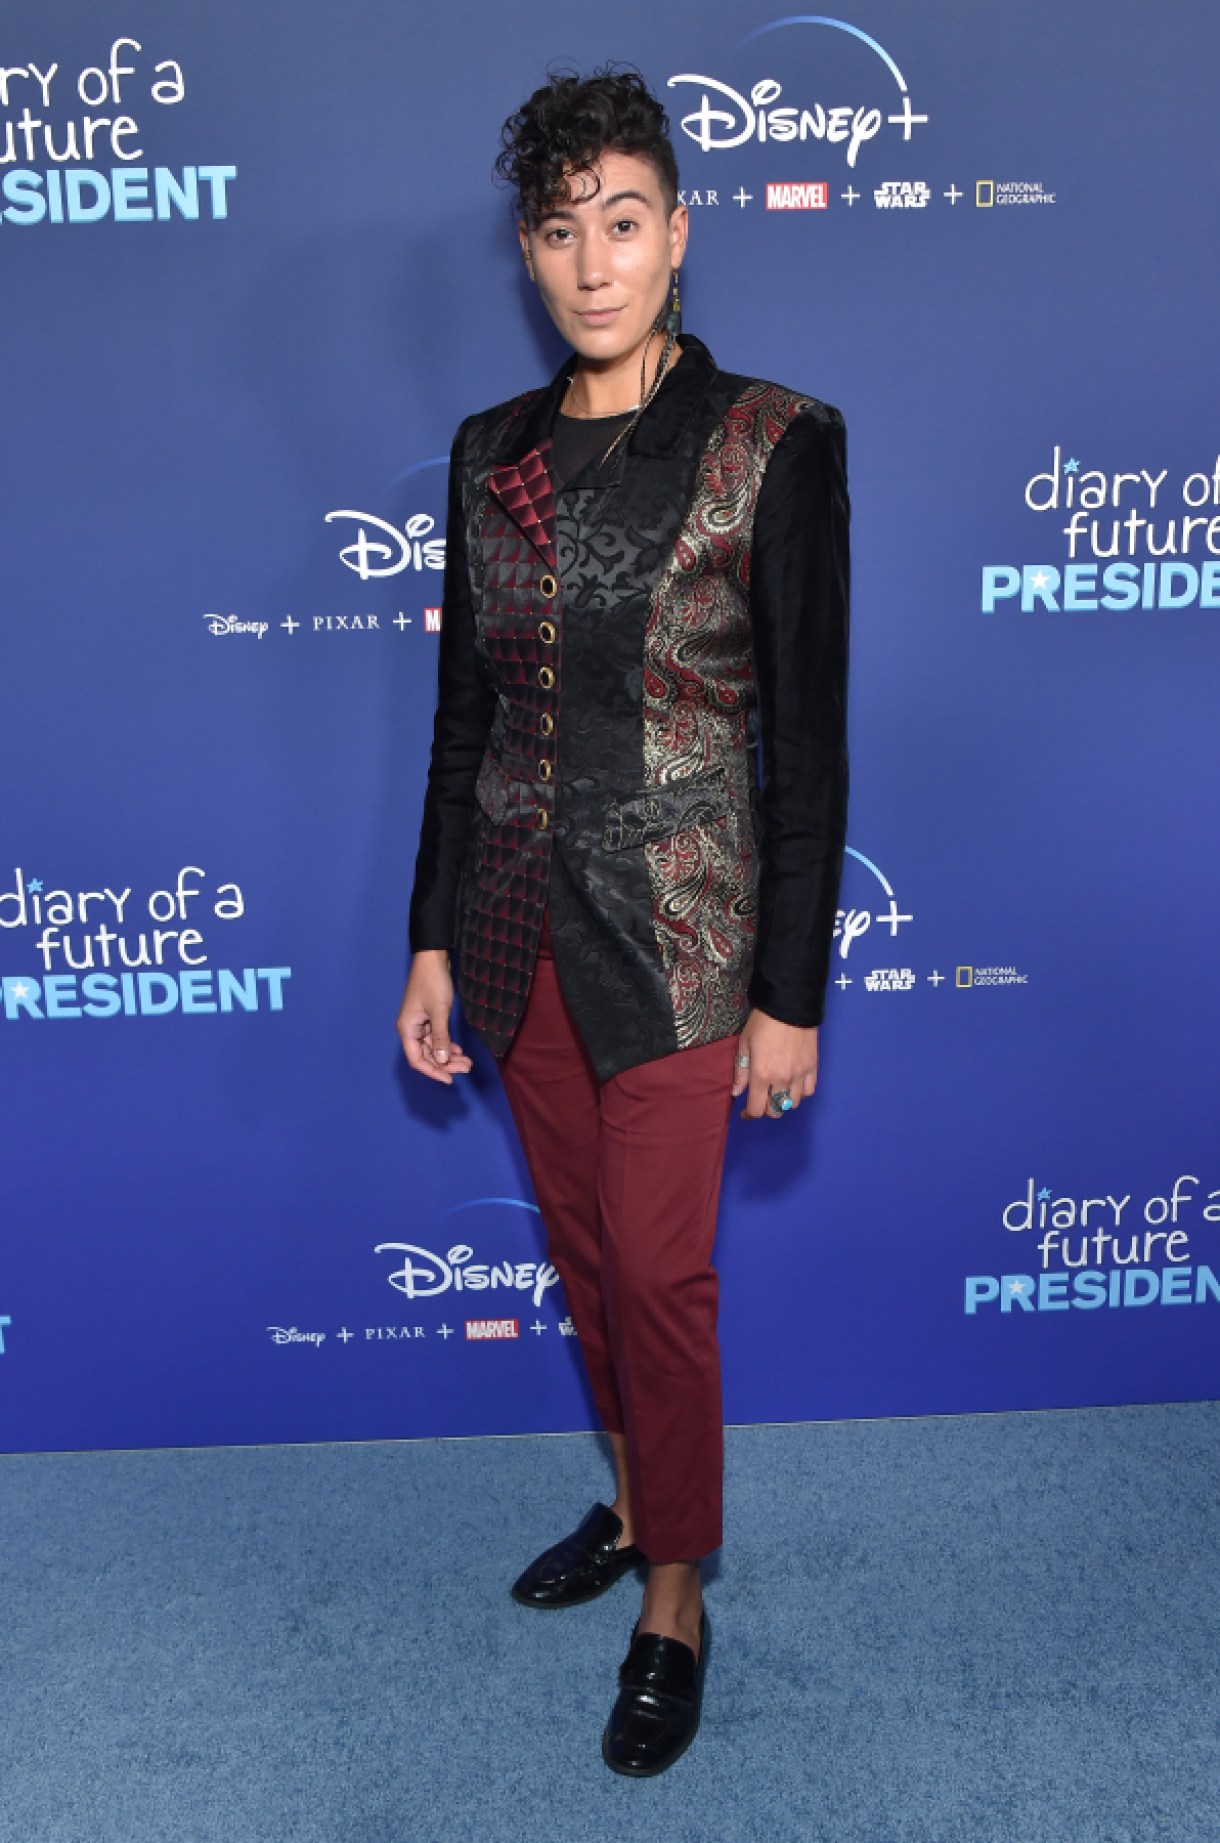 Non binary performer Vico Ortiz arrives for Disney+ Los Angeles premiere of "Diary of a Future President" at the ArcLight Cinema in Hollywood, California, on January 14, 2020. (Photo by LISA O'CONNOR / AFP) (Photo by LISA O'CONNOR/AFP via Getty Images)